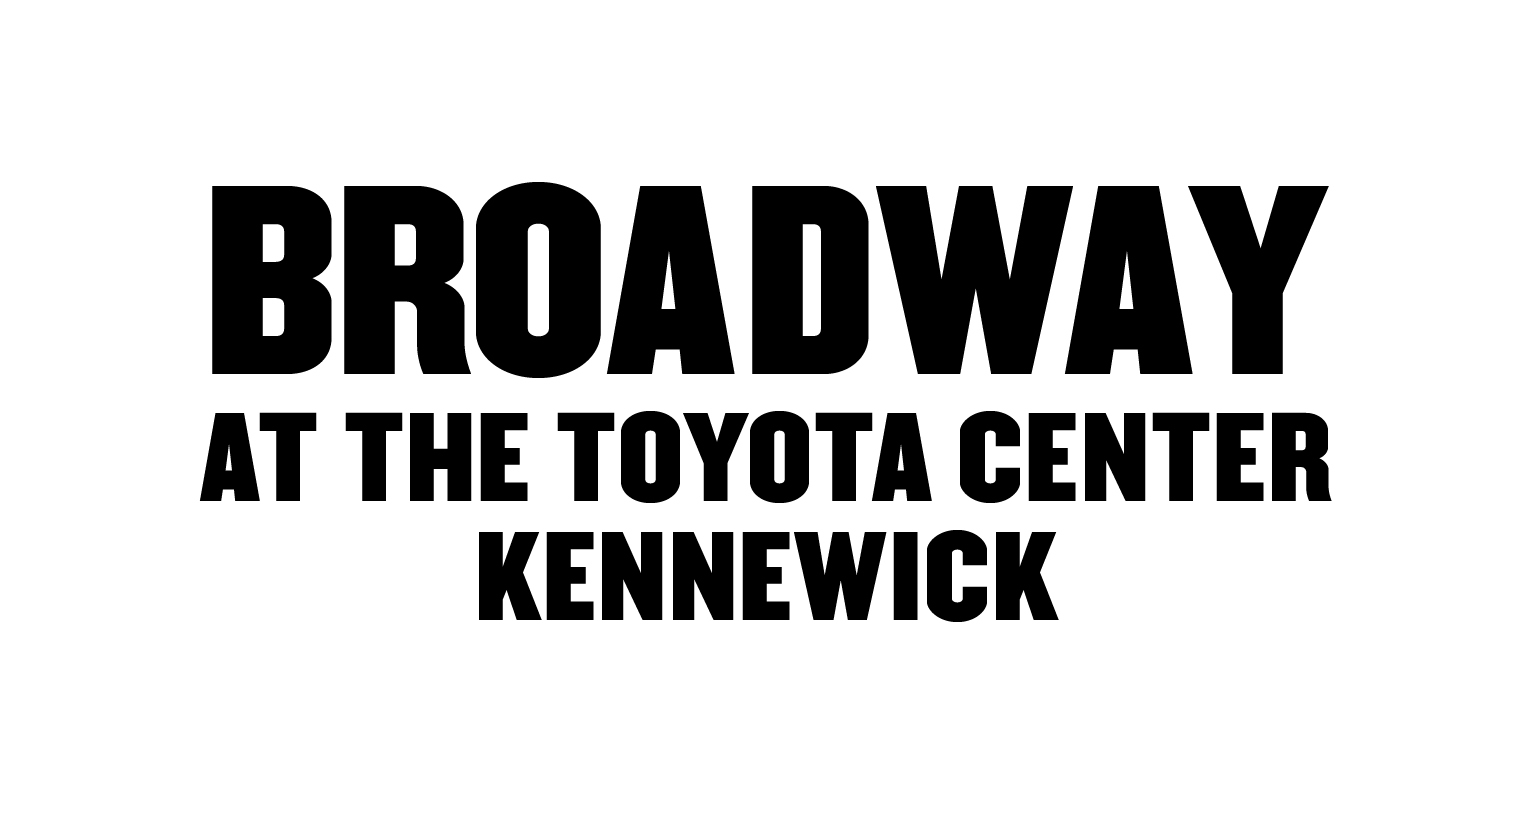 Broadway at the Toyota Center - Kennewick